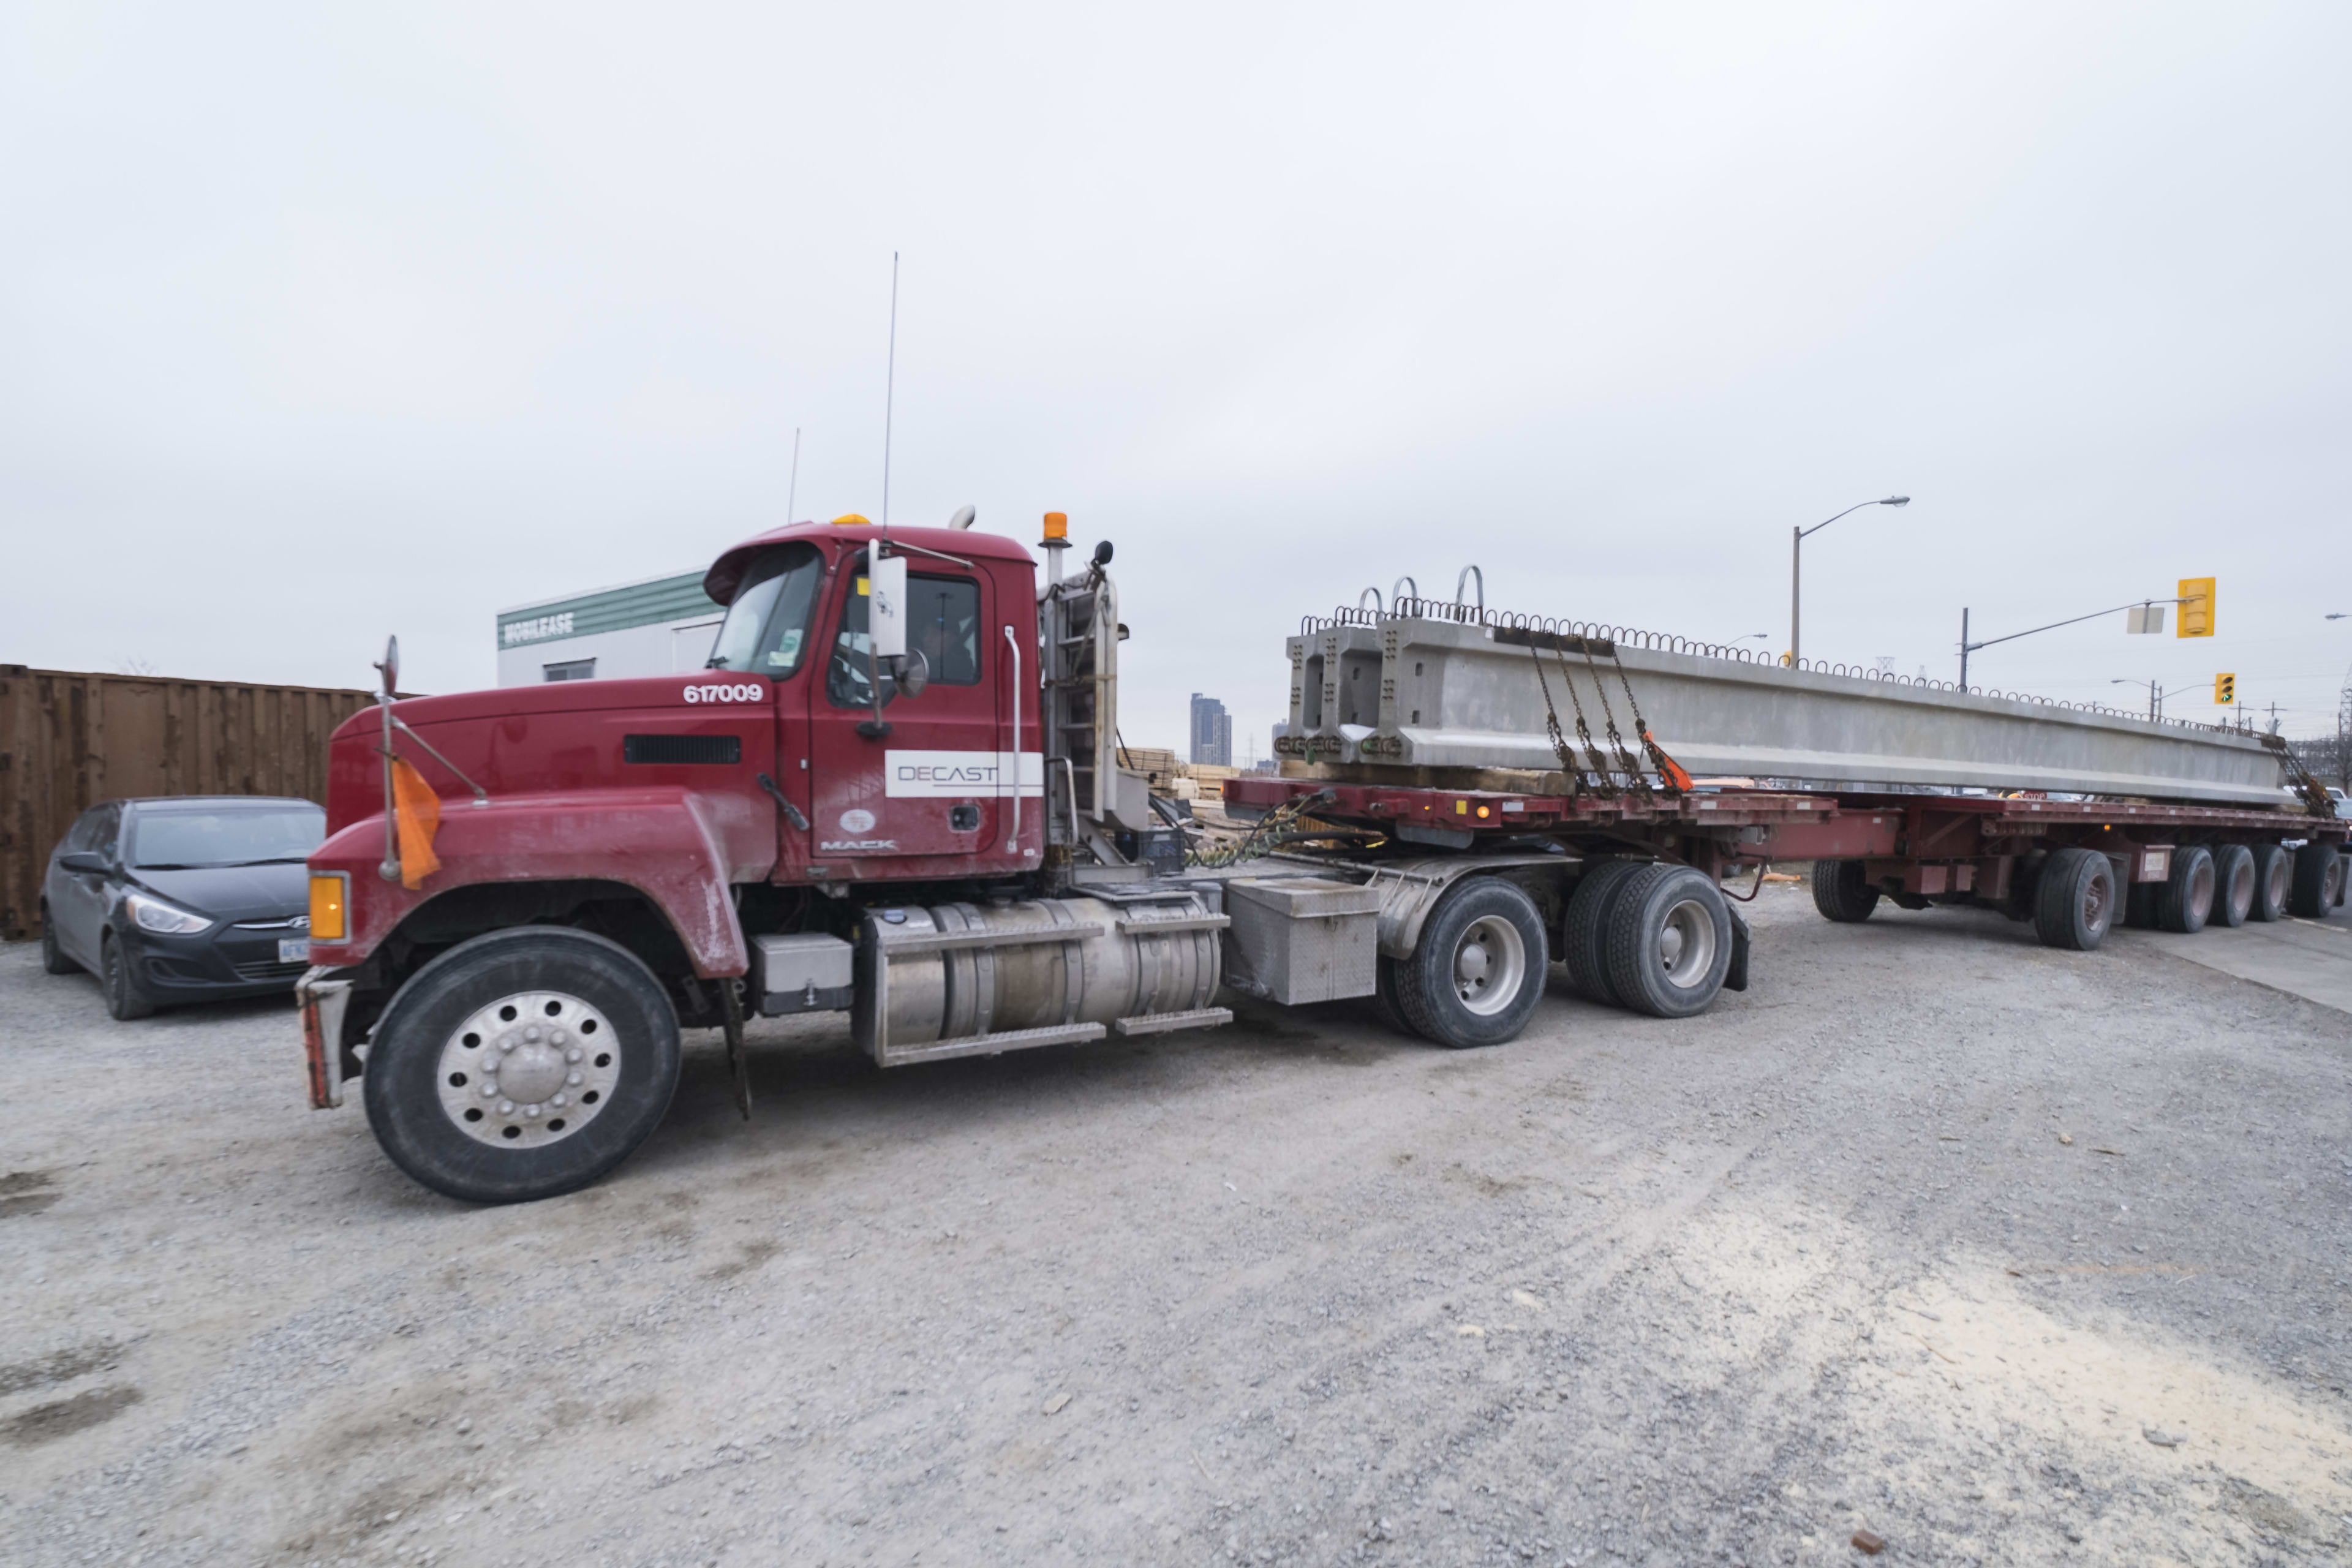 A truck delivers a girder in this file image.